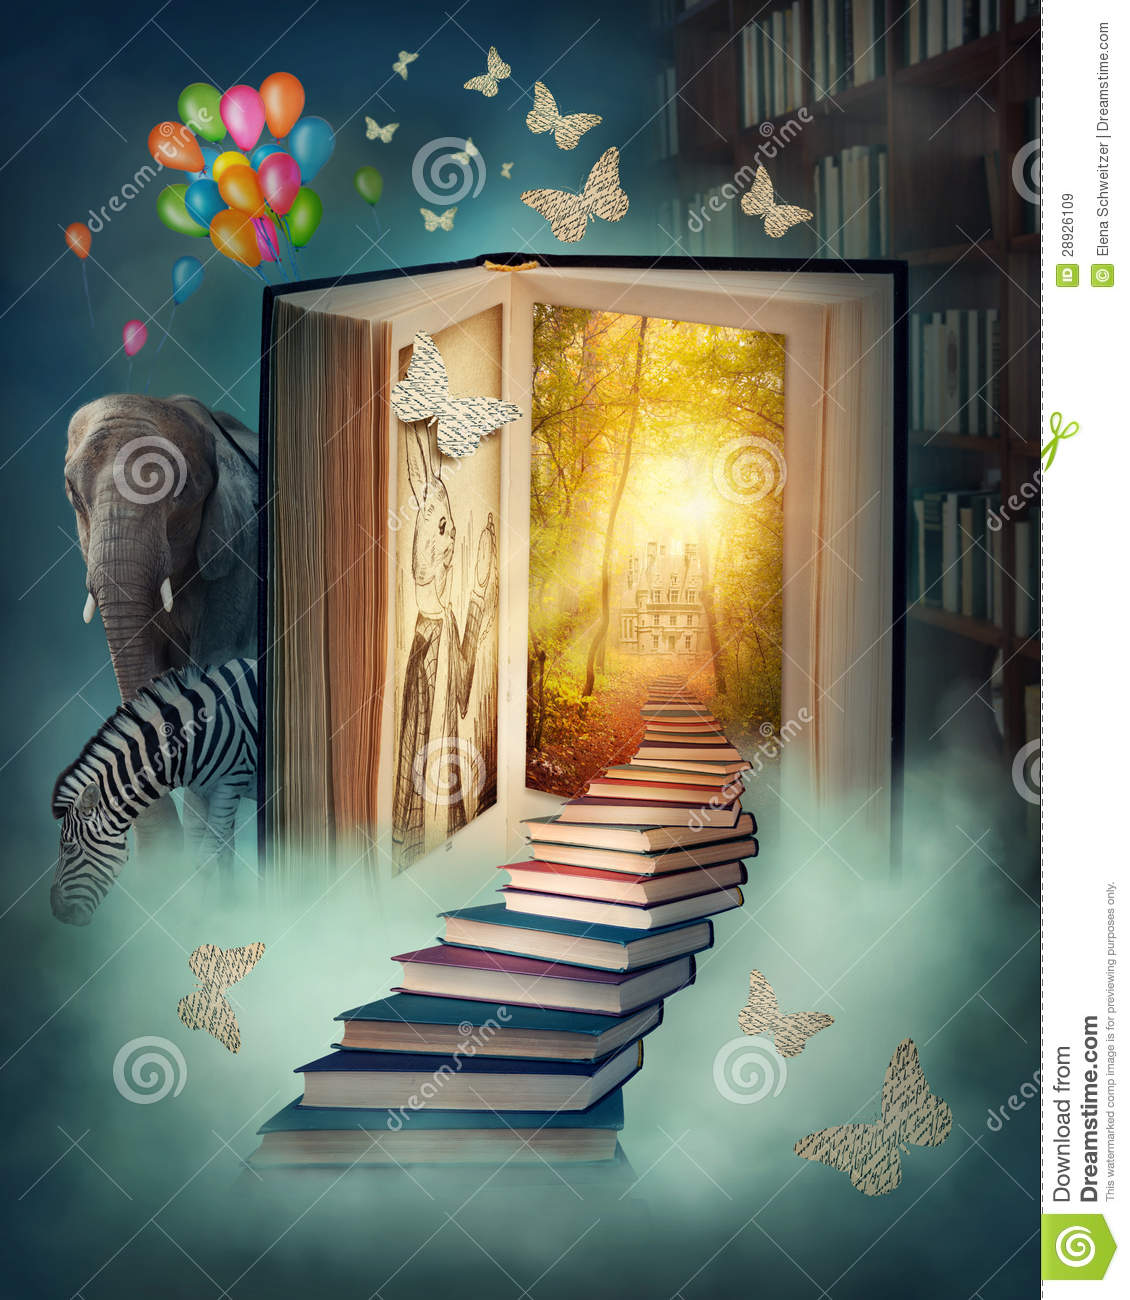 Upstairs To The Magic Land Royalty Free Stock Images   Image  28926109